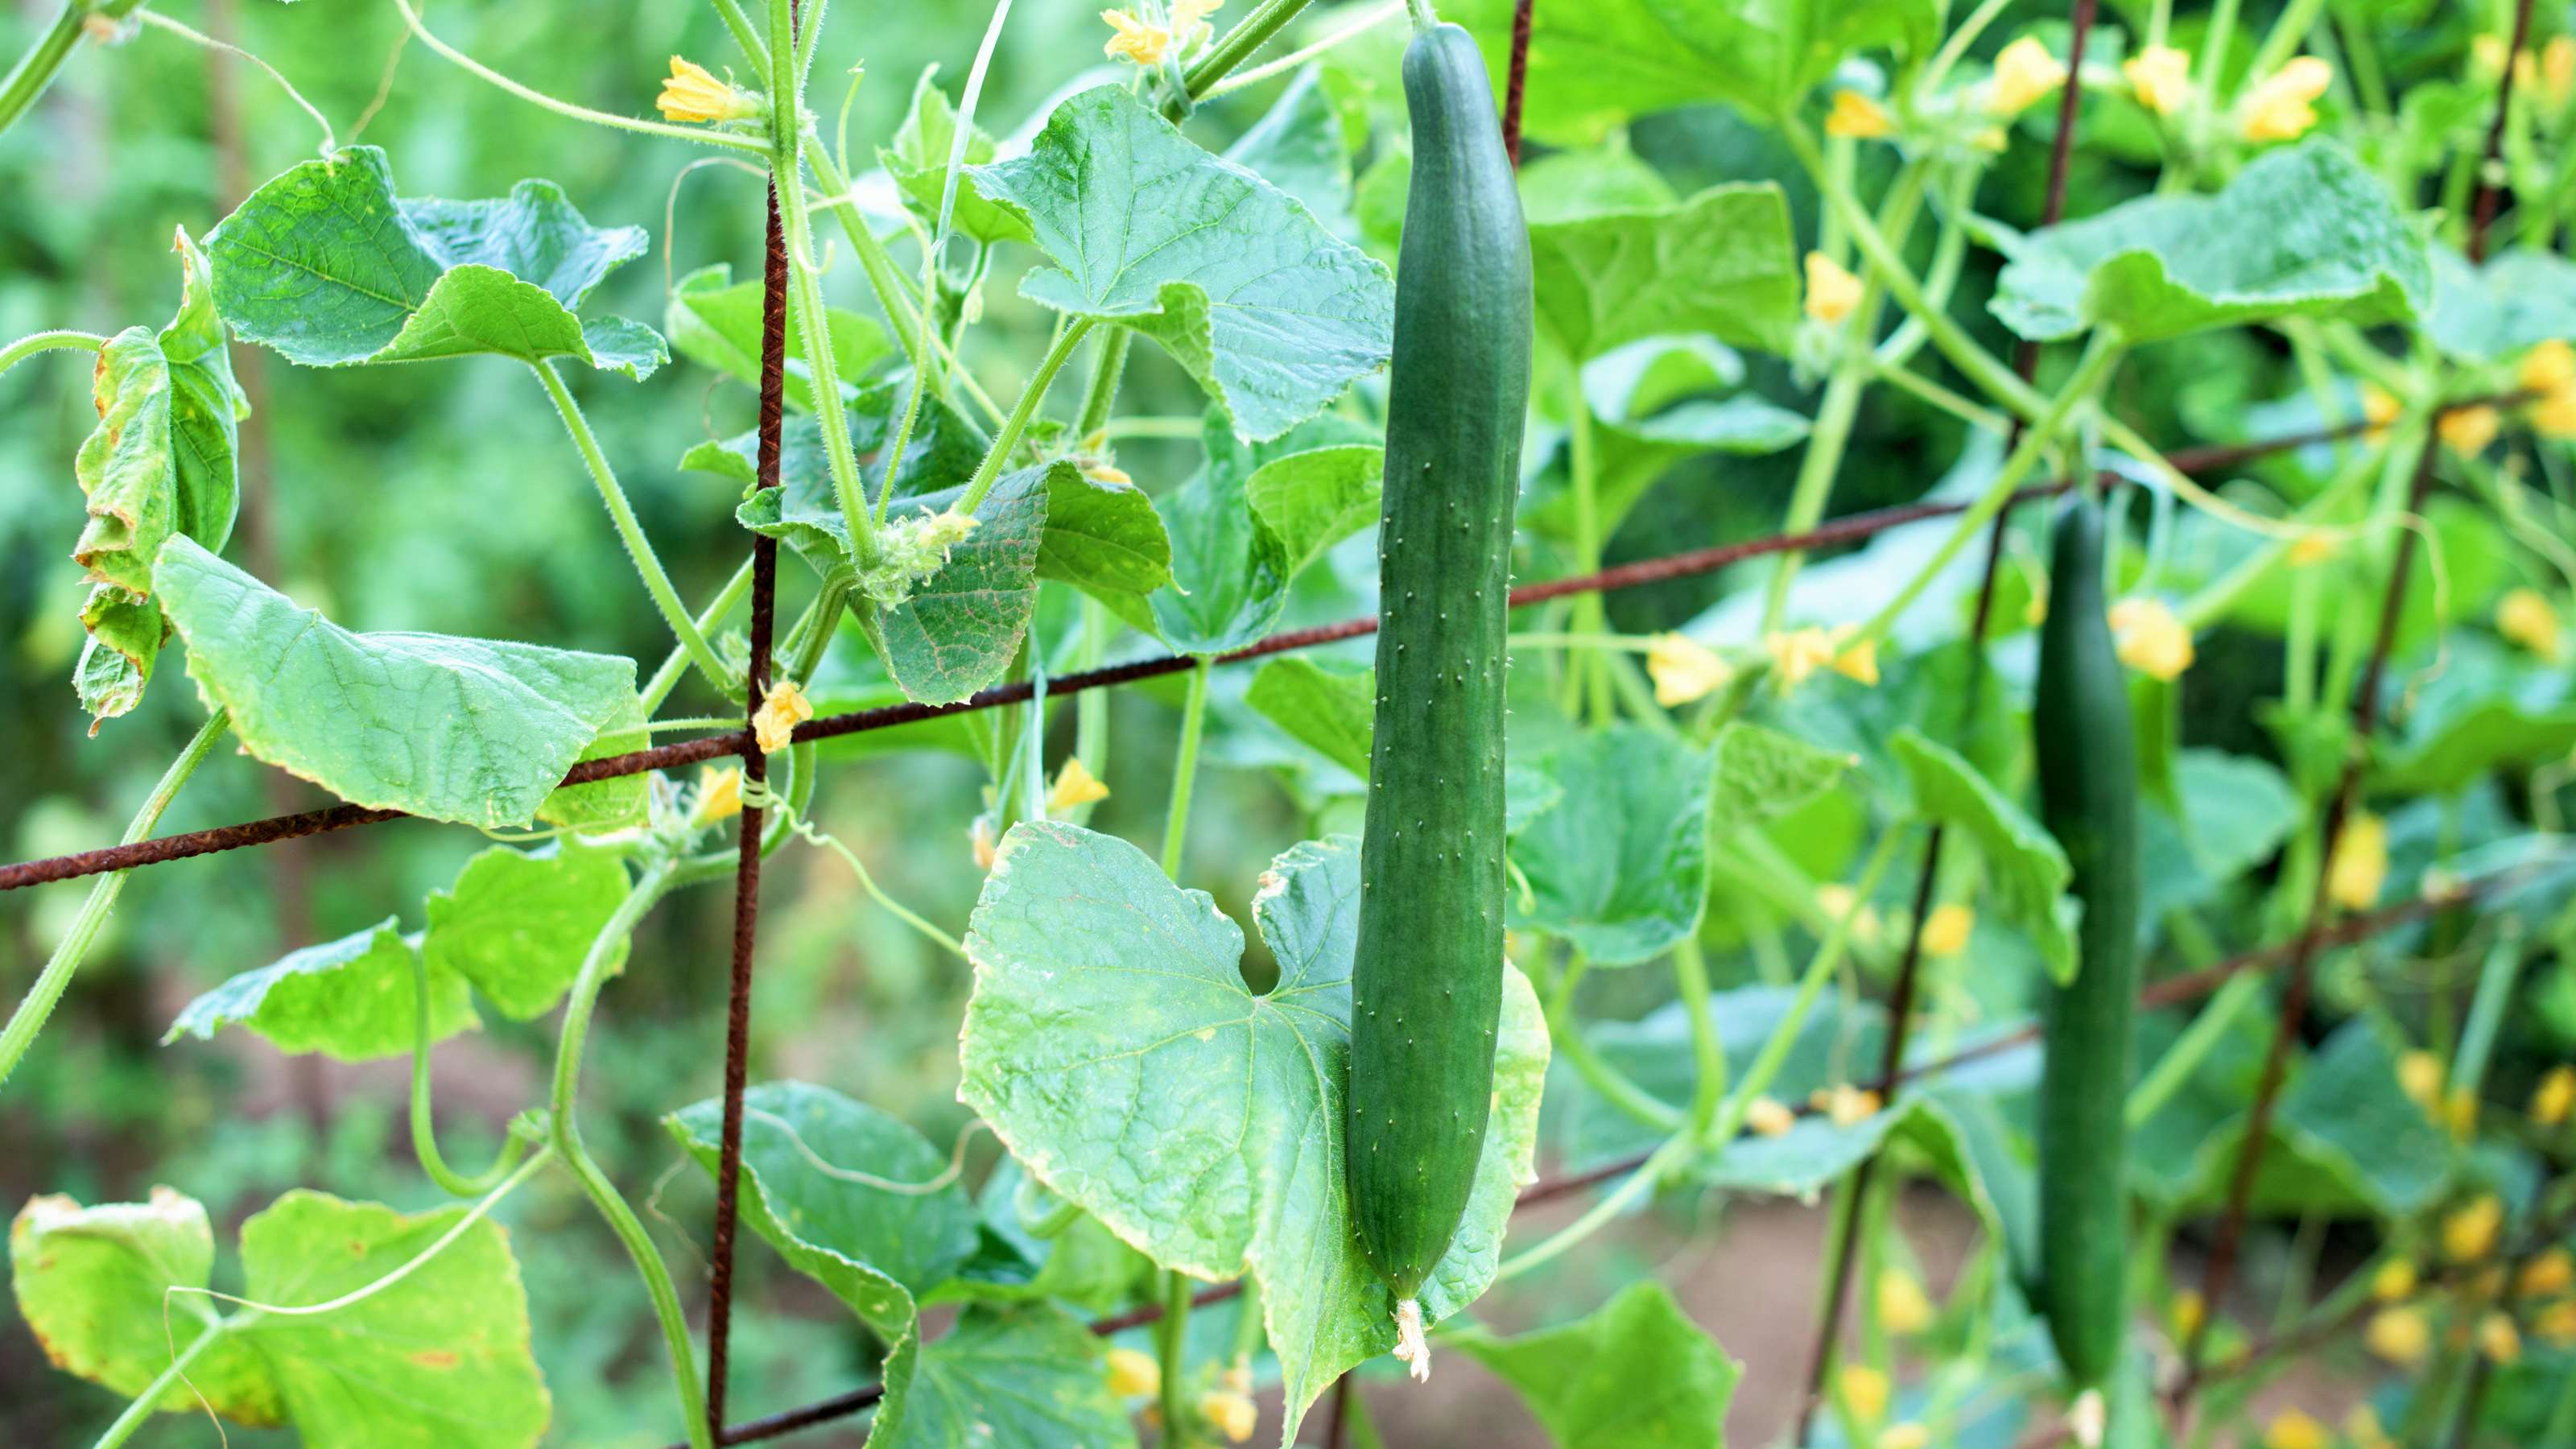 Image of Cucumbers companion plant for string beans